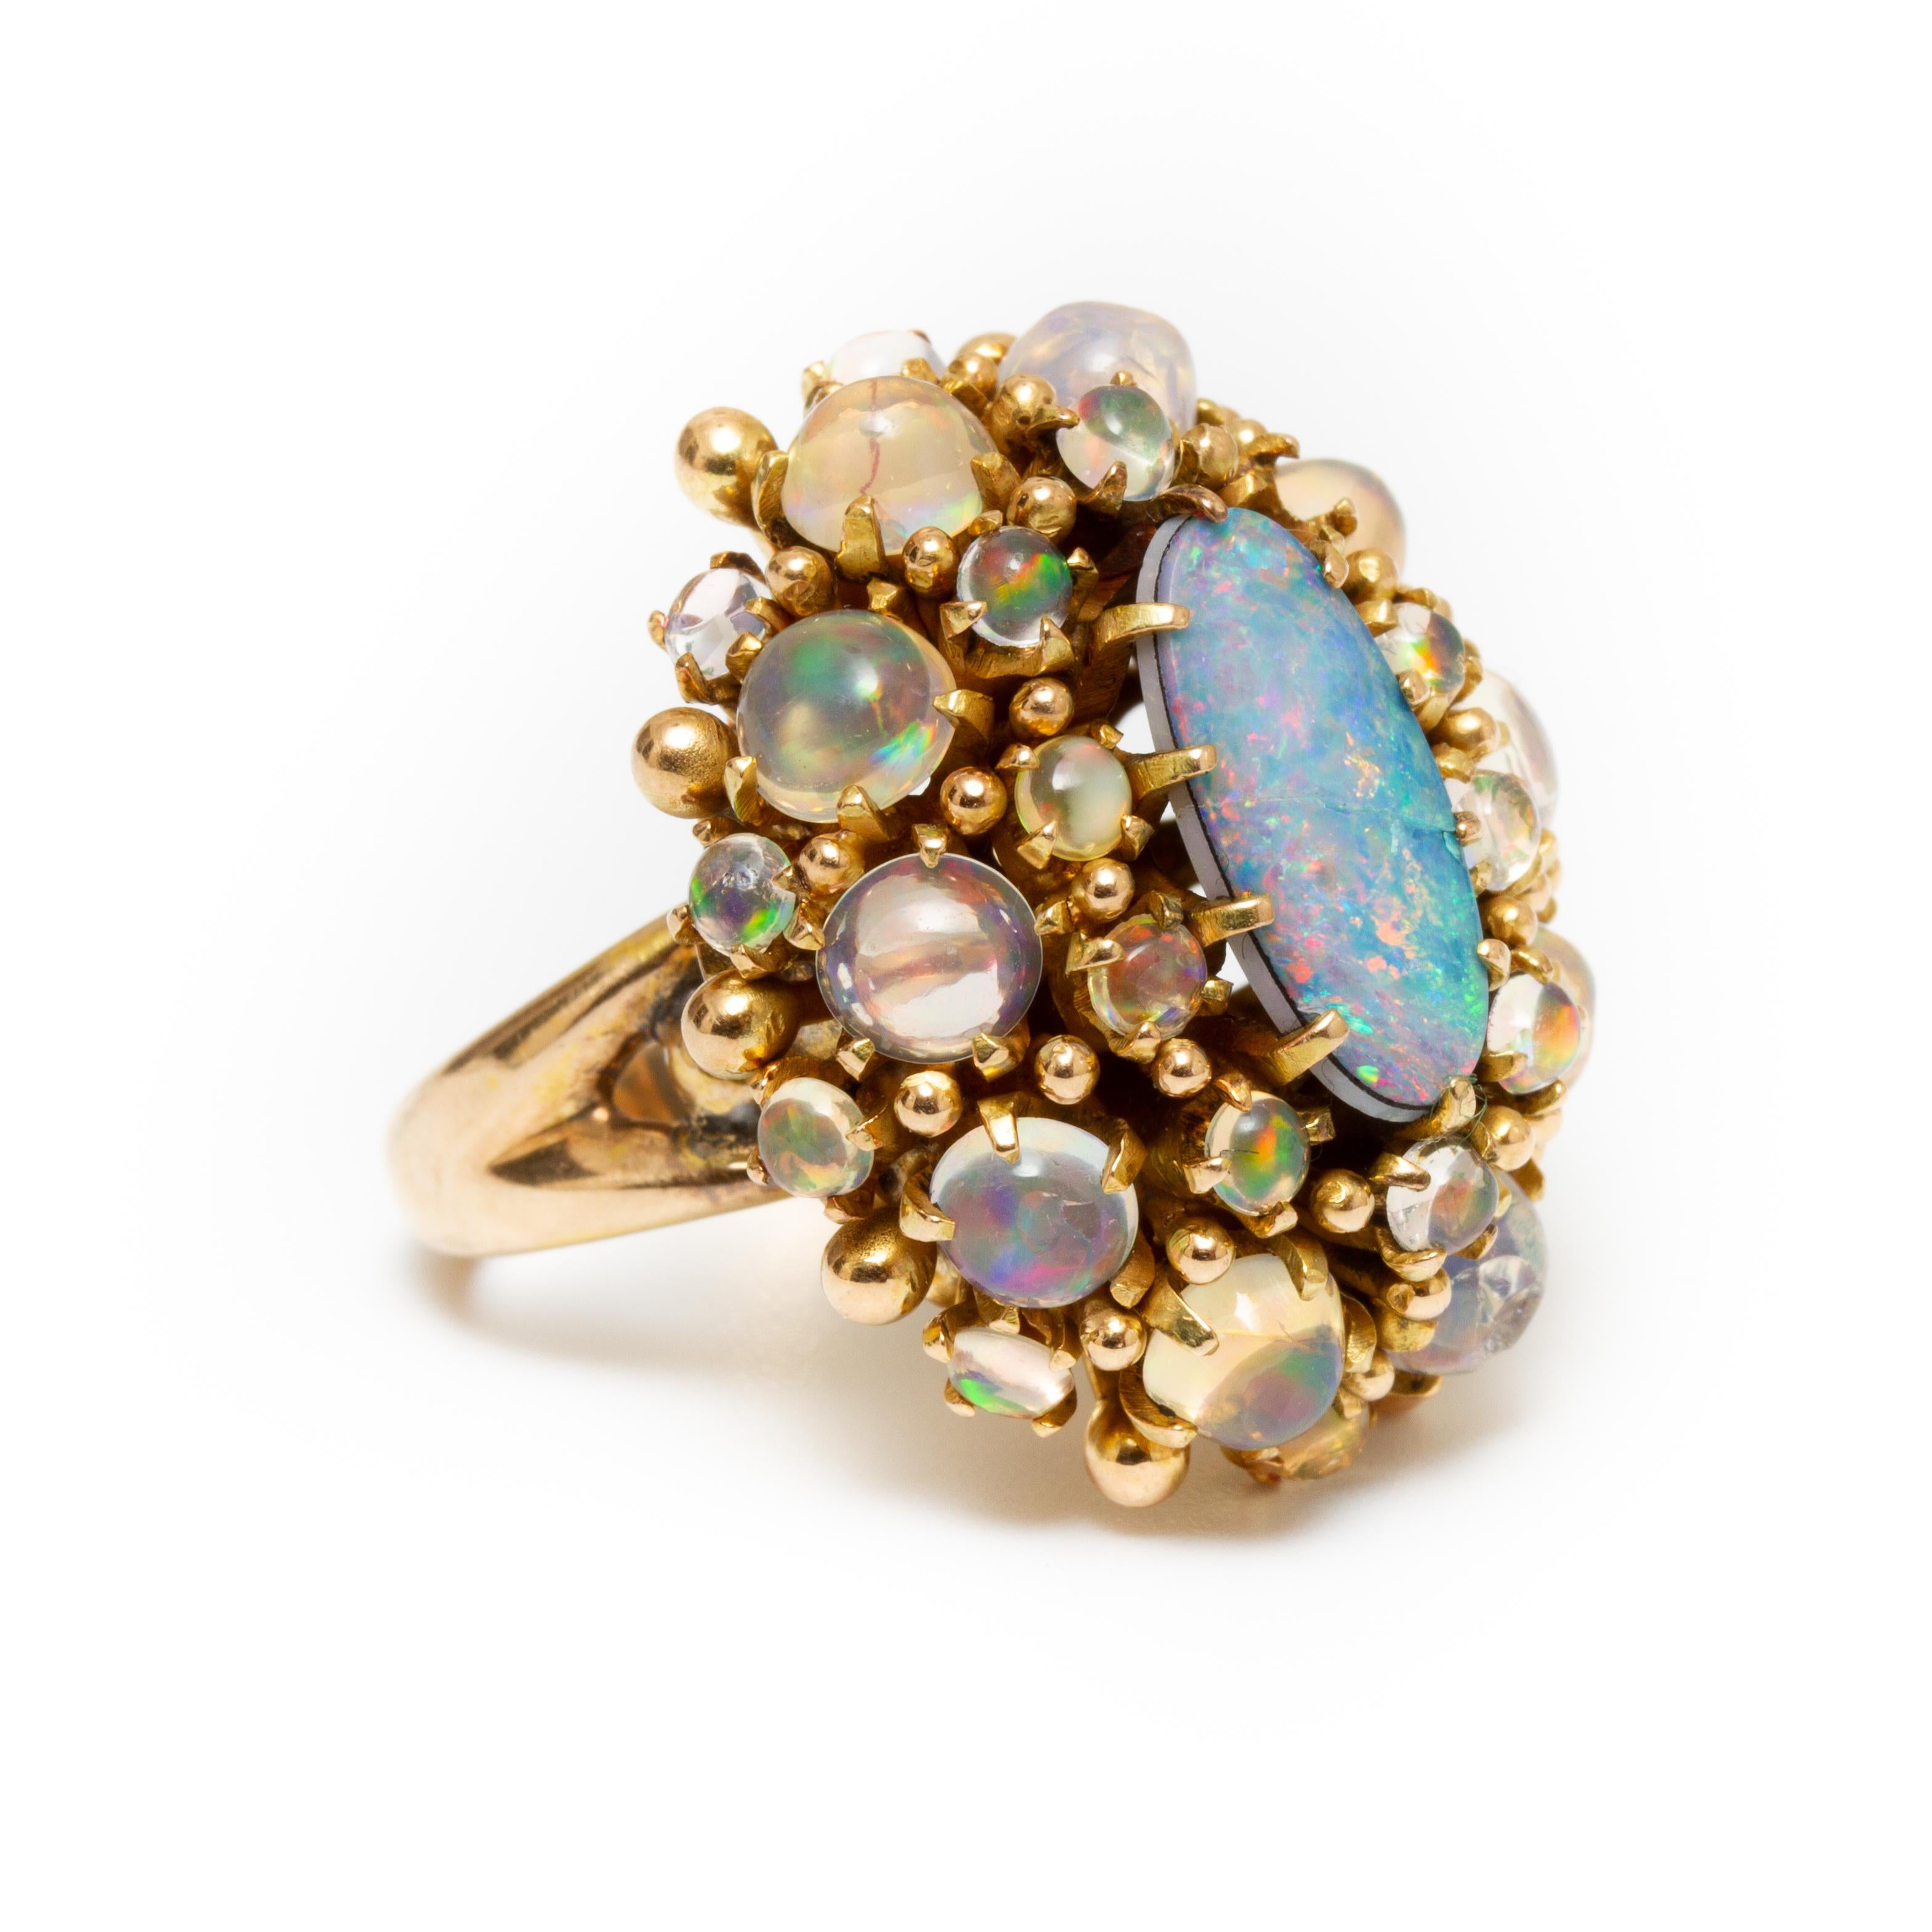 Offered is a Vintage 14K Yellow Gold Opal Triplet Cabochon Ring Surrounded by smaller opals. There are 29 Stones in total. It weighs a total of 14.60 dwt and is a size 6.